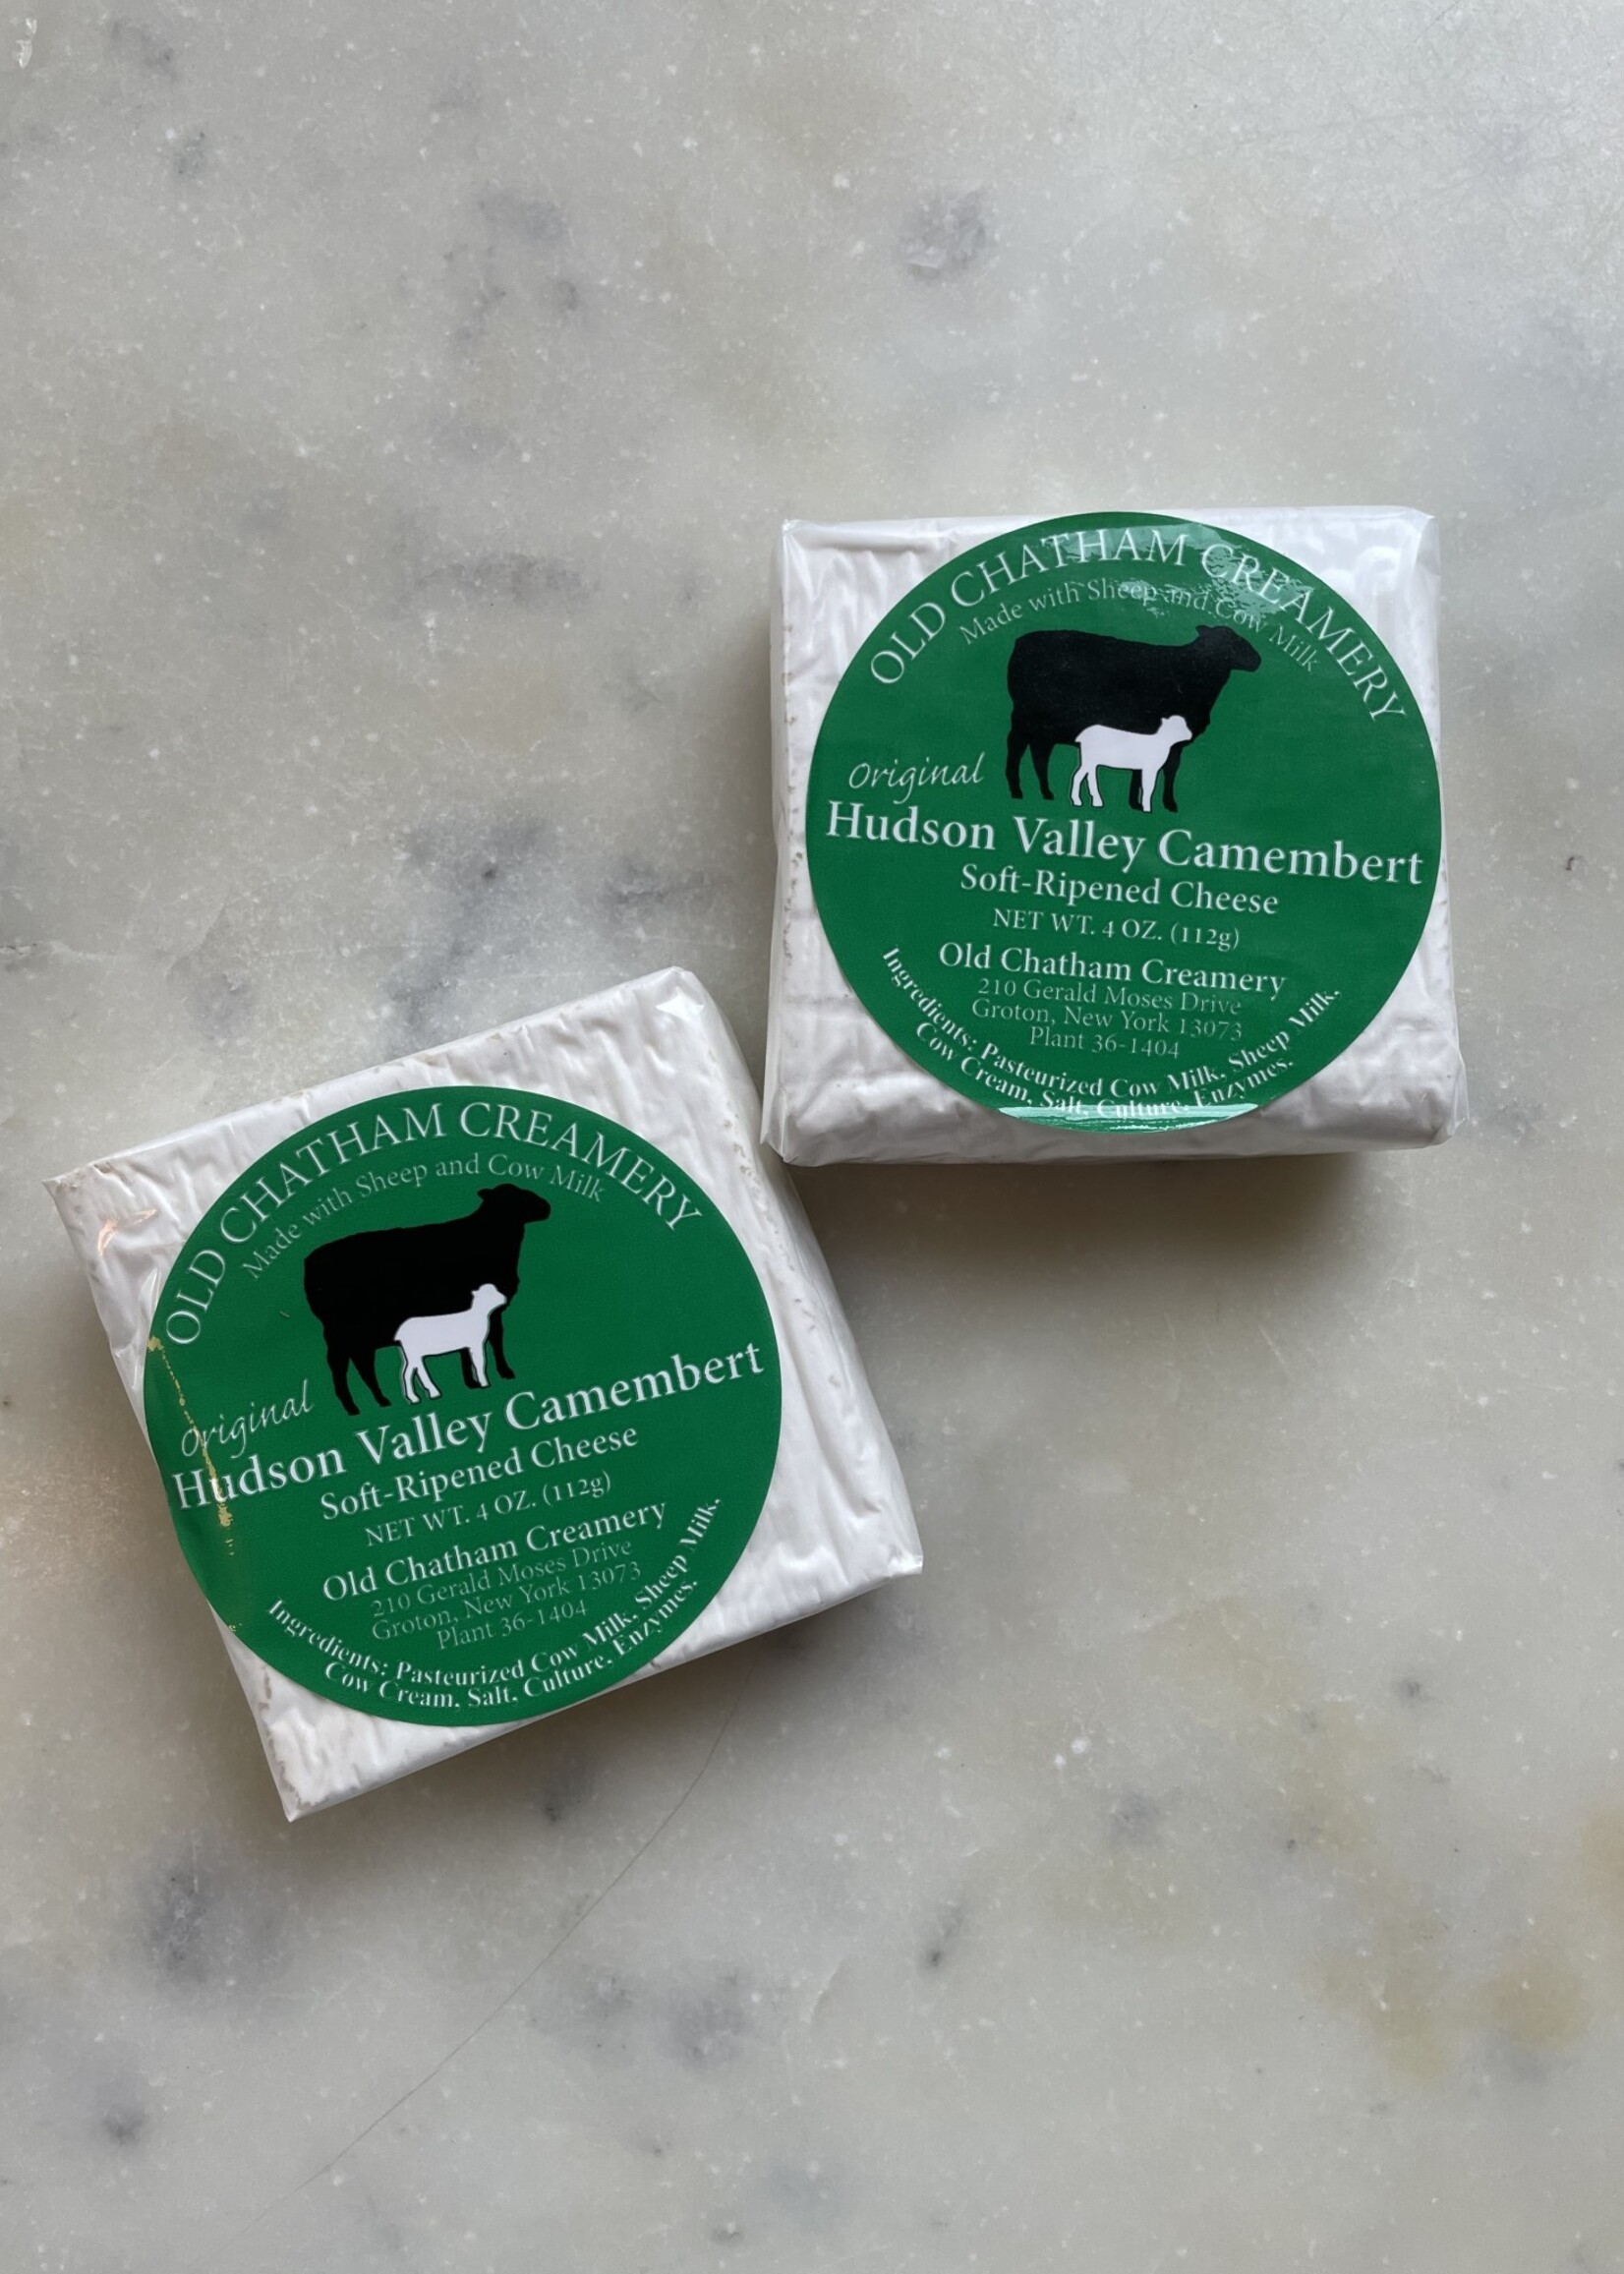 Old Chatham Creamery, Hudson Valley Camembert Soft Ripened Cheese 4oz (112g)